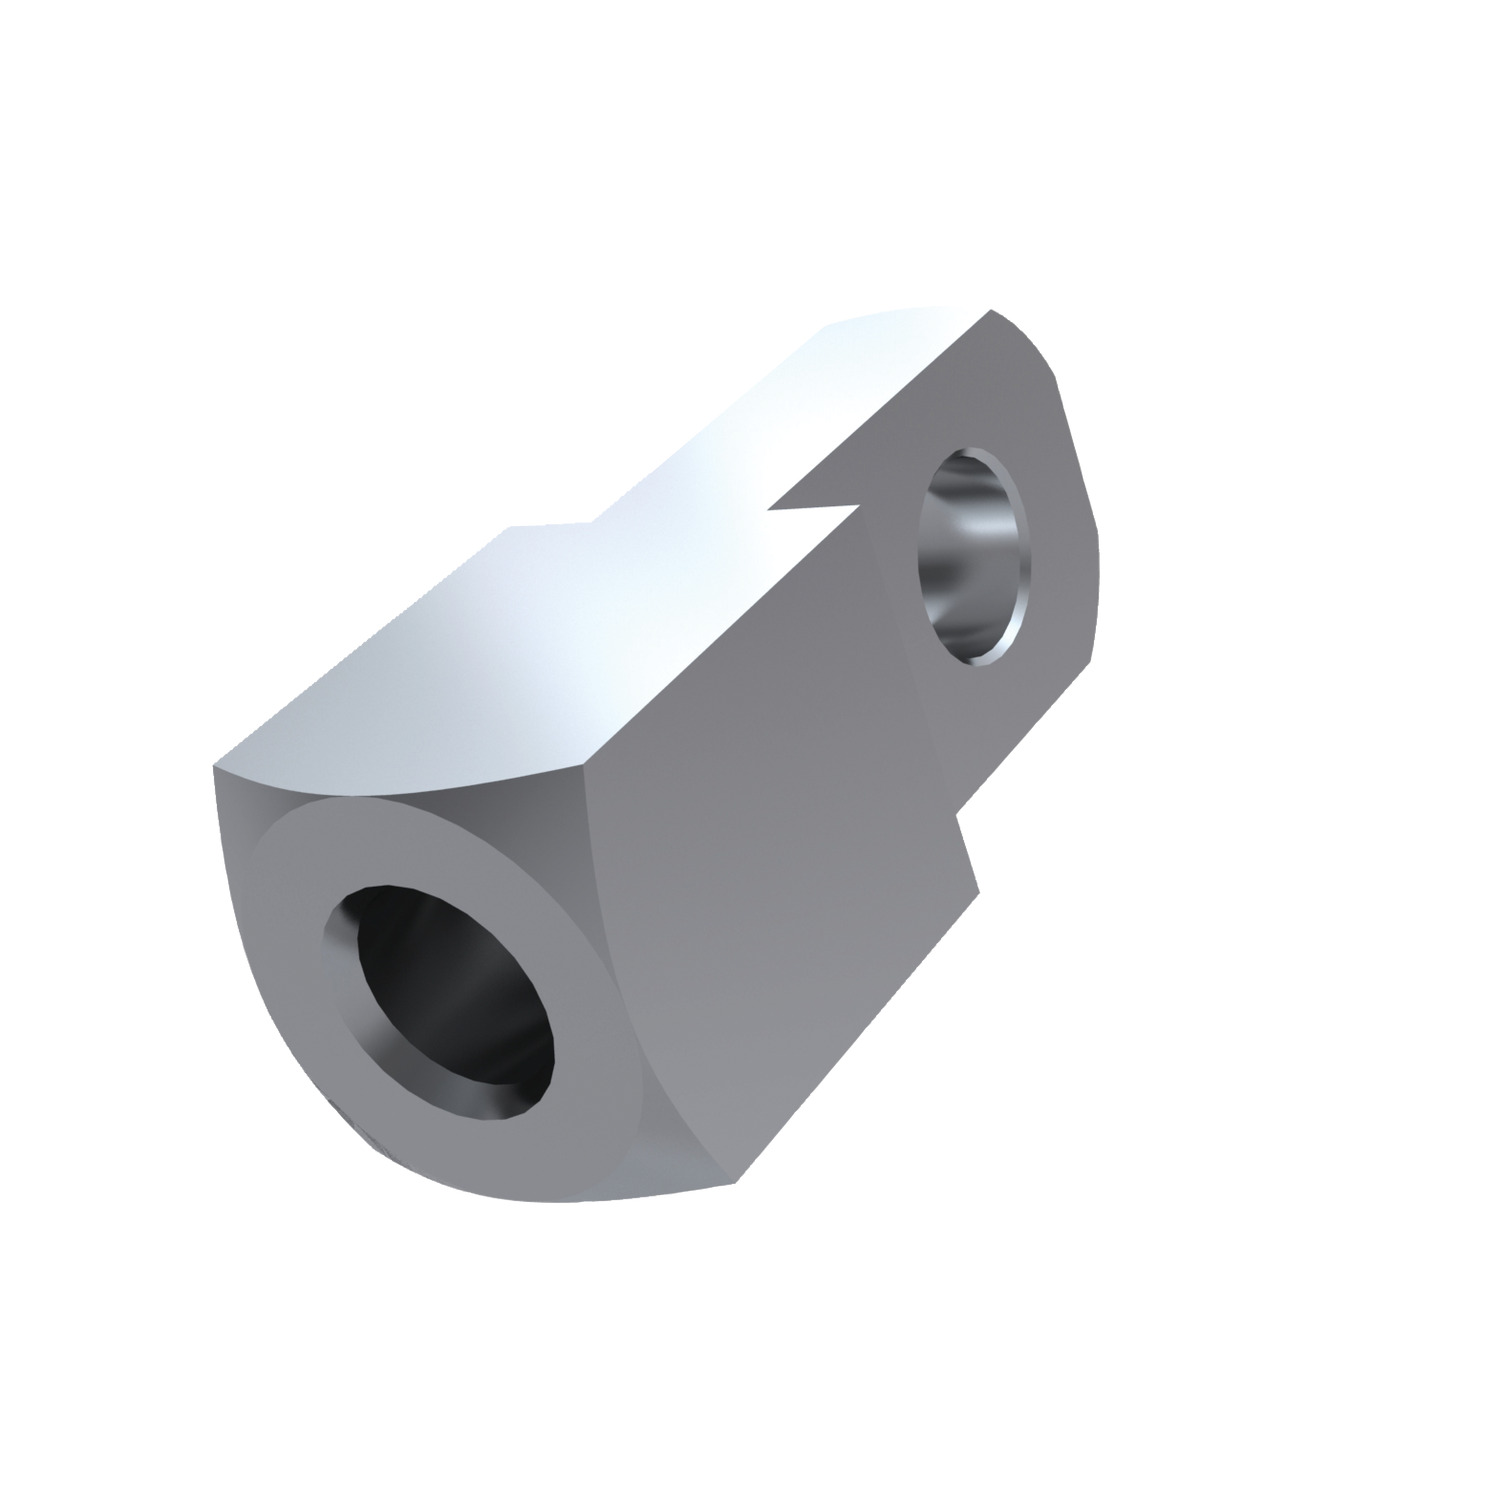 65653.W1004 Mating Piece for Clevis Joints - ZP St. Left - Coarse - 4 - 6,0